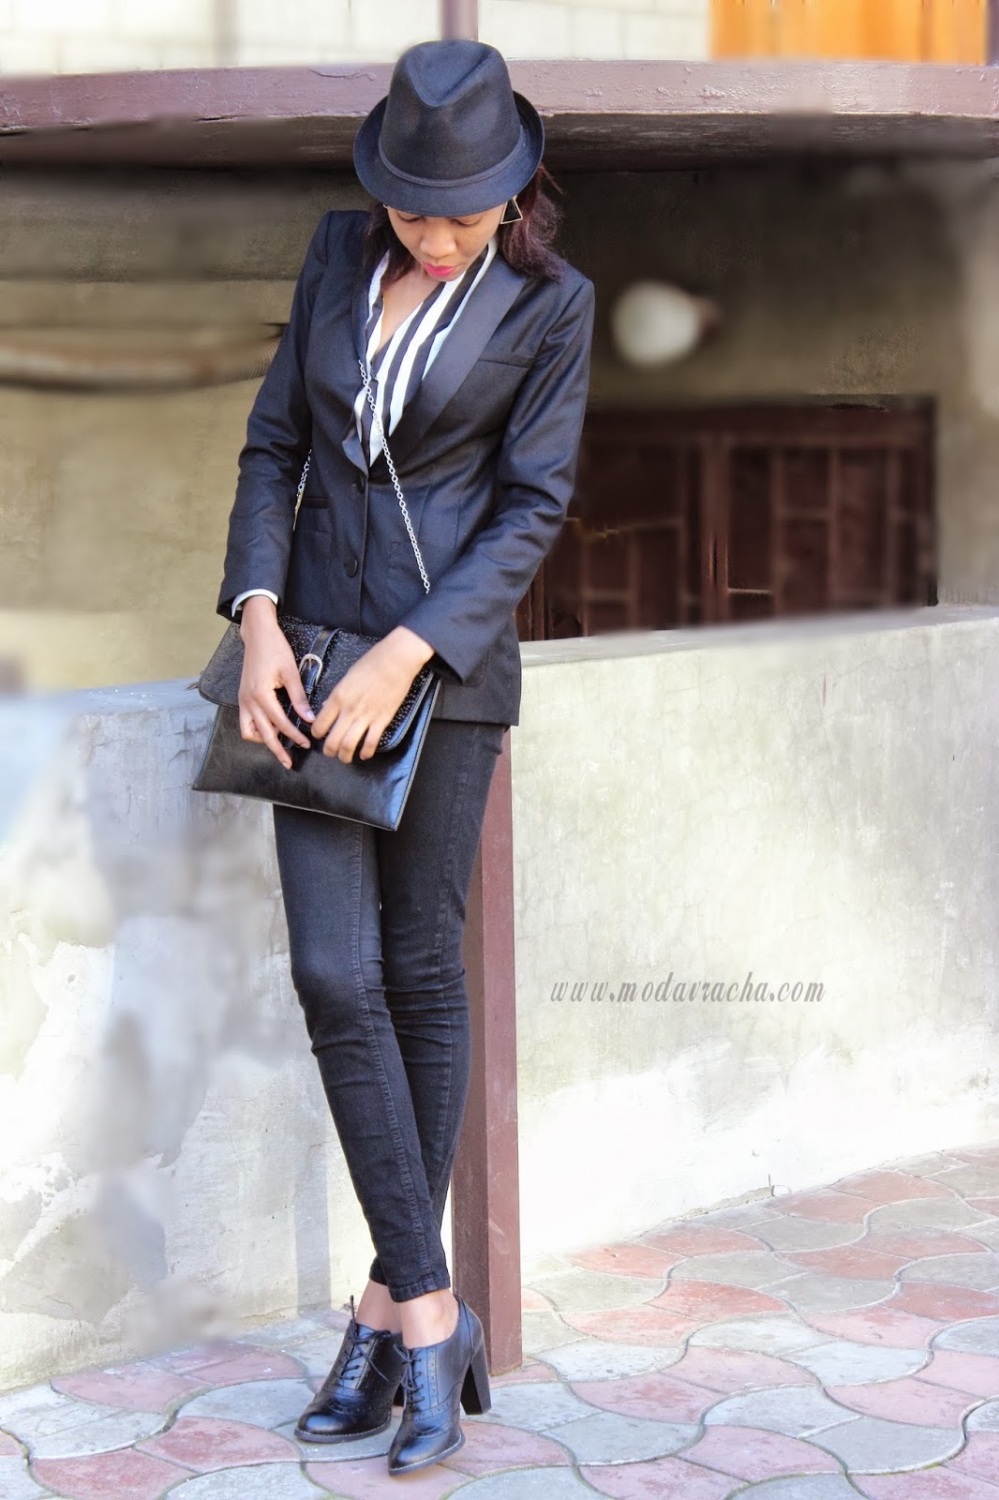 Womens suit outfit with fedora hat